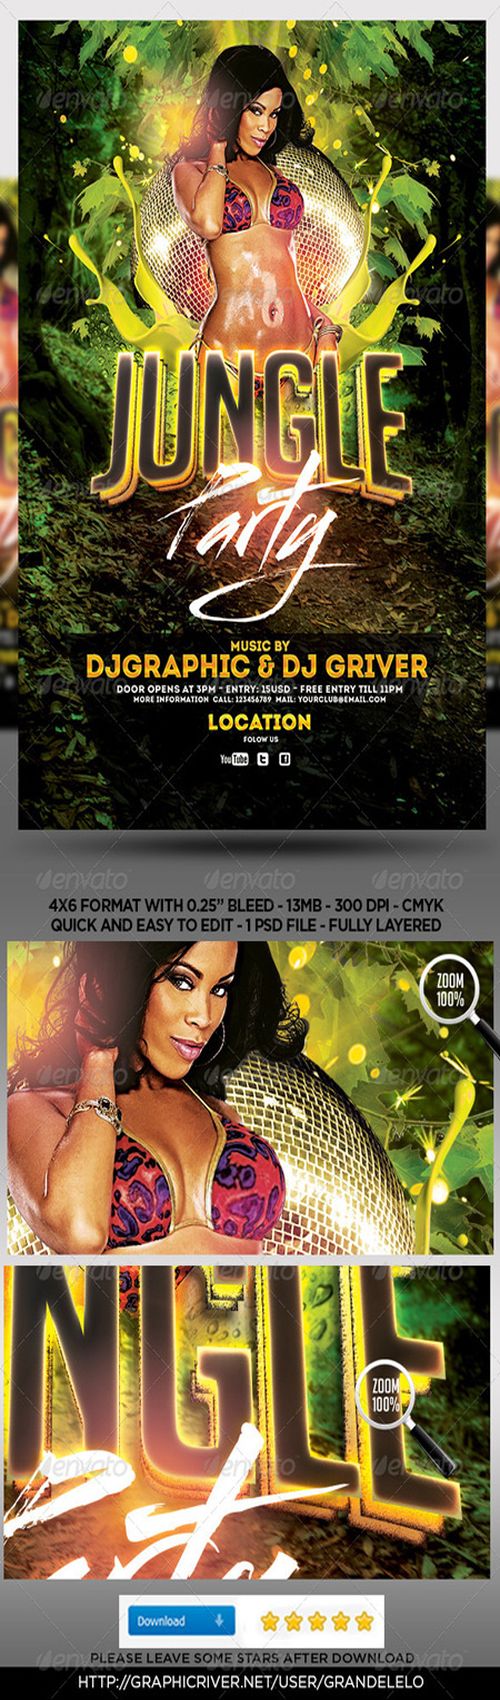 PSD - GraphicRiver Jungle party Flyer Template